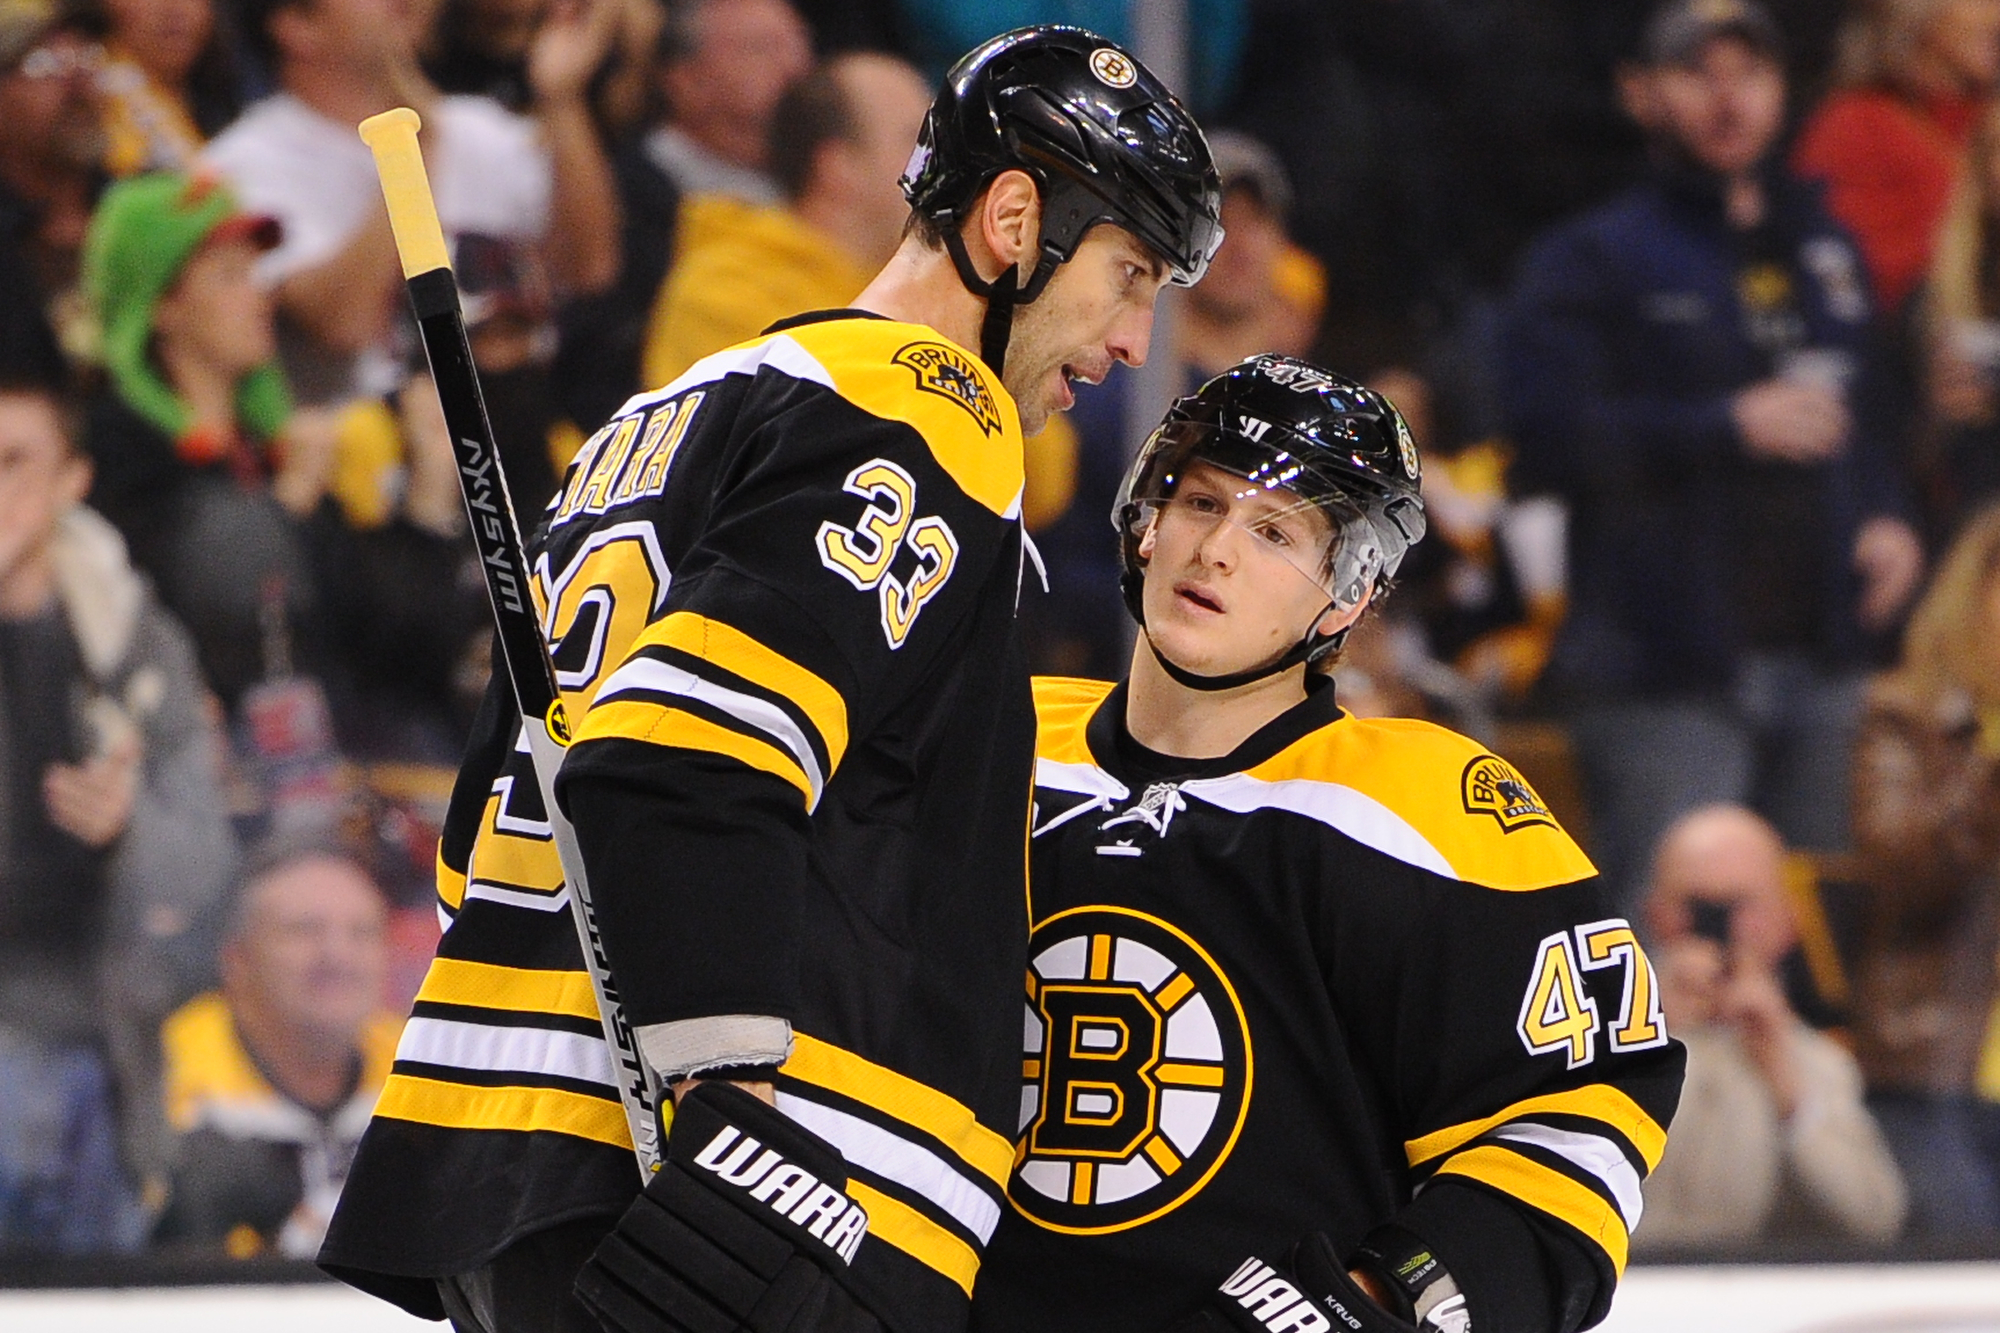 Bruins notebook: Torey Krug appears ready for game action – Boston Herald